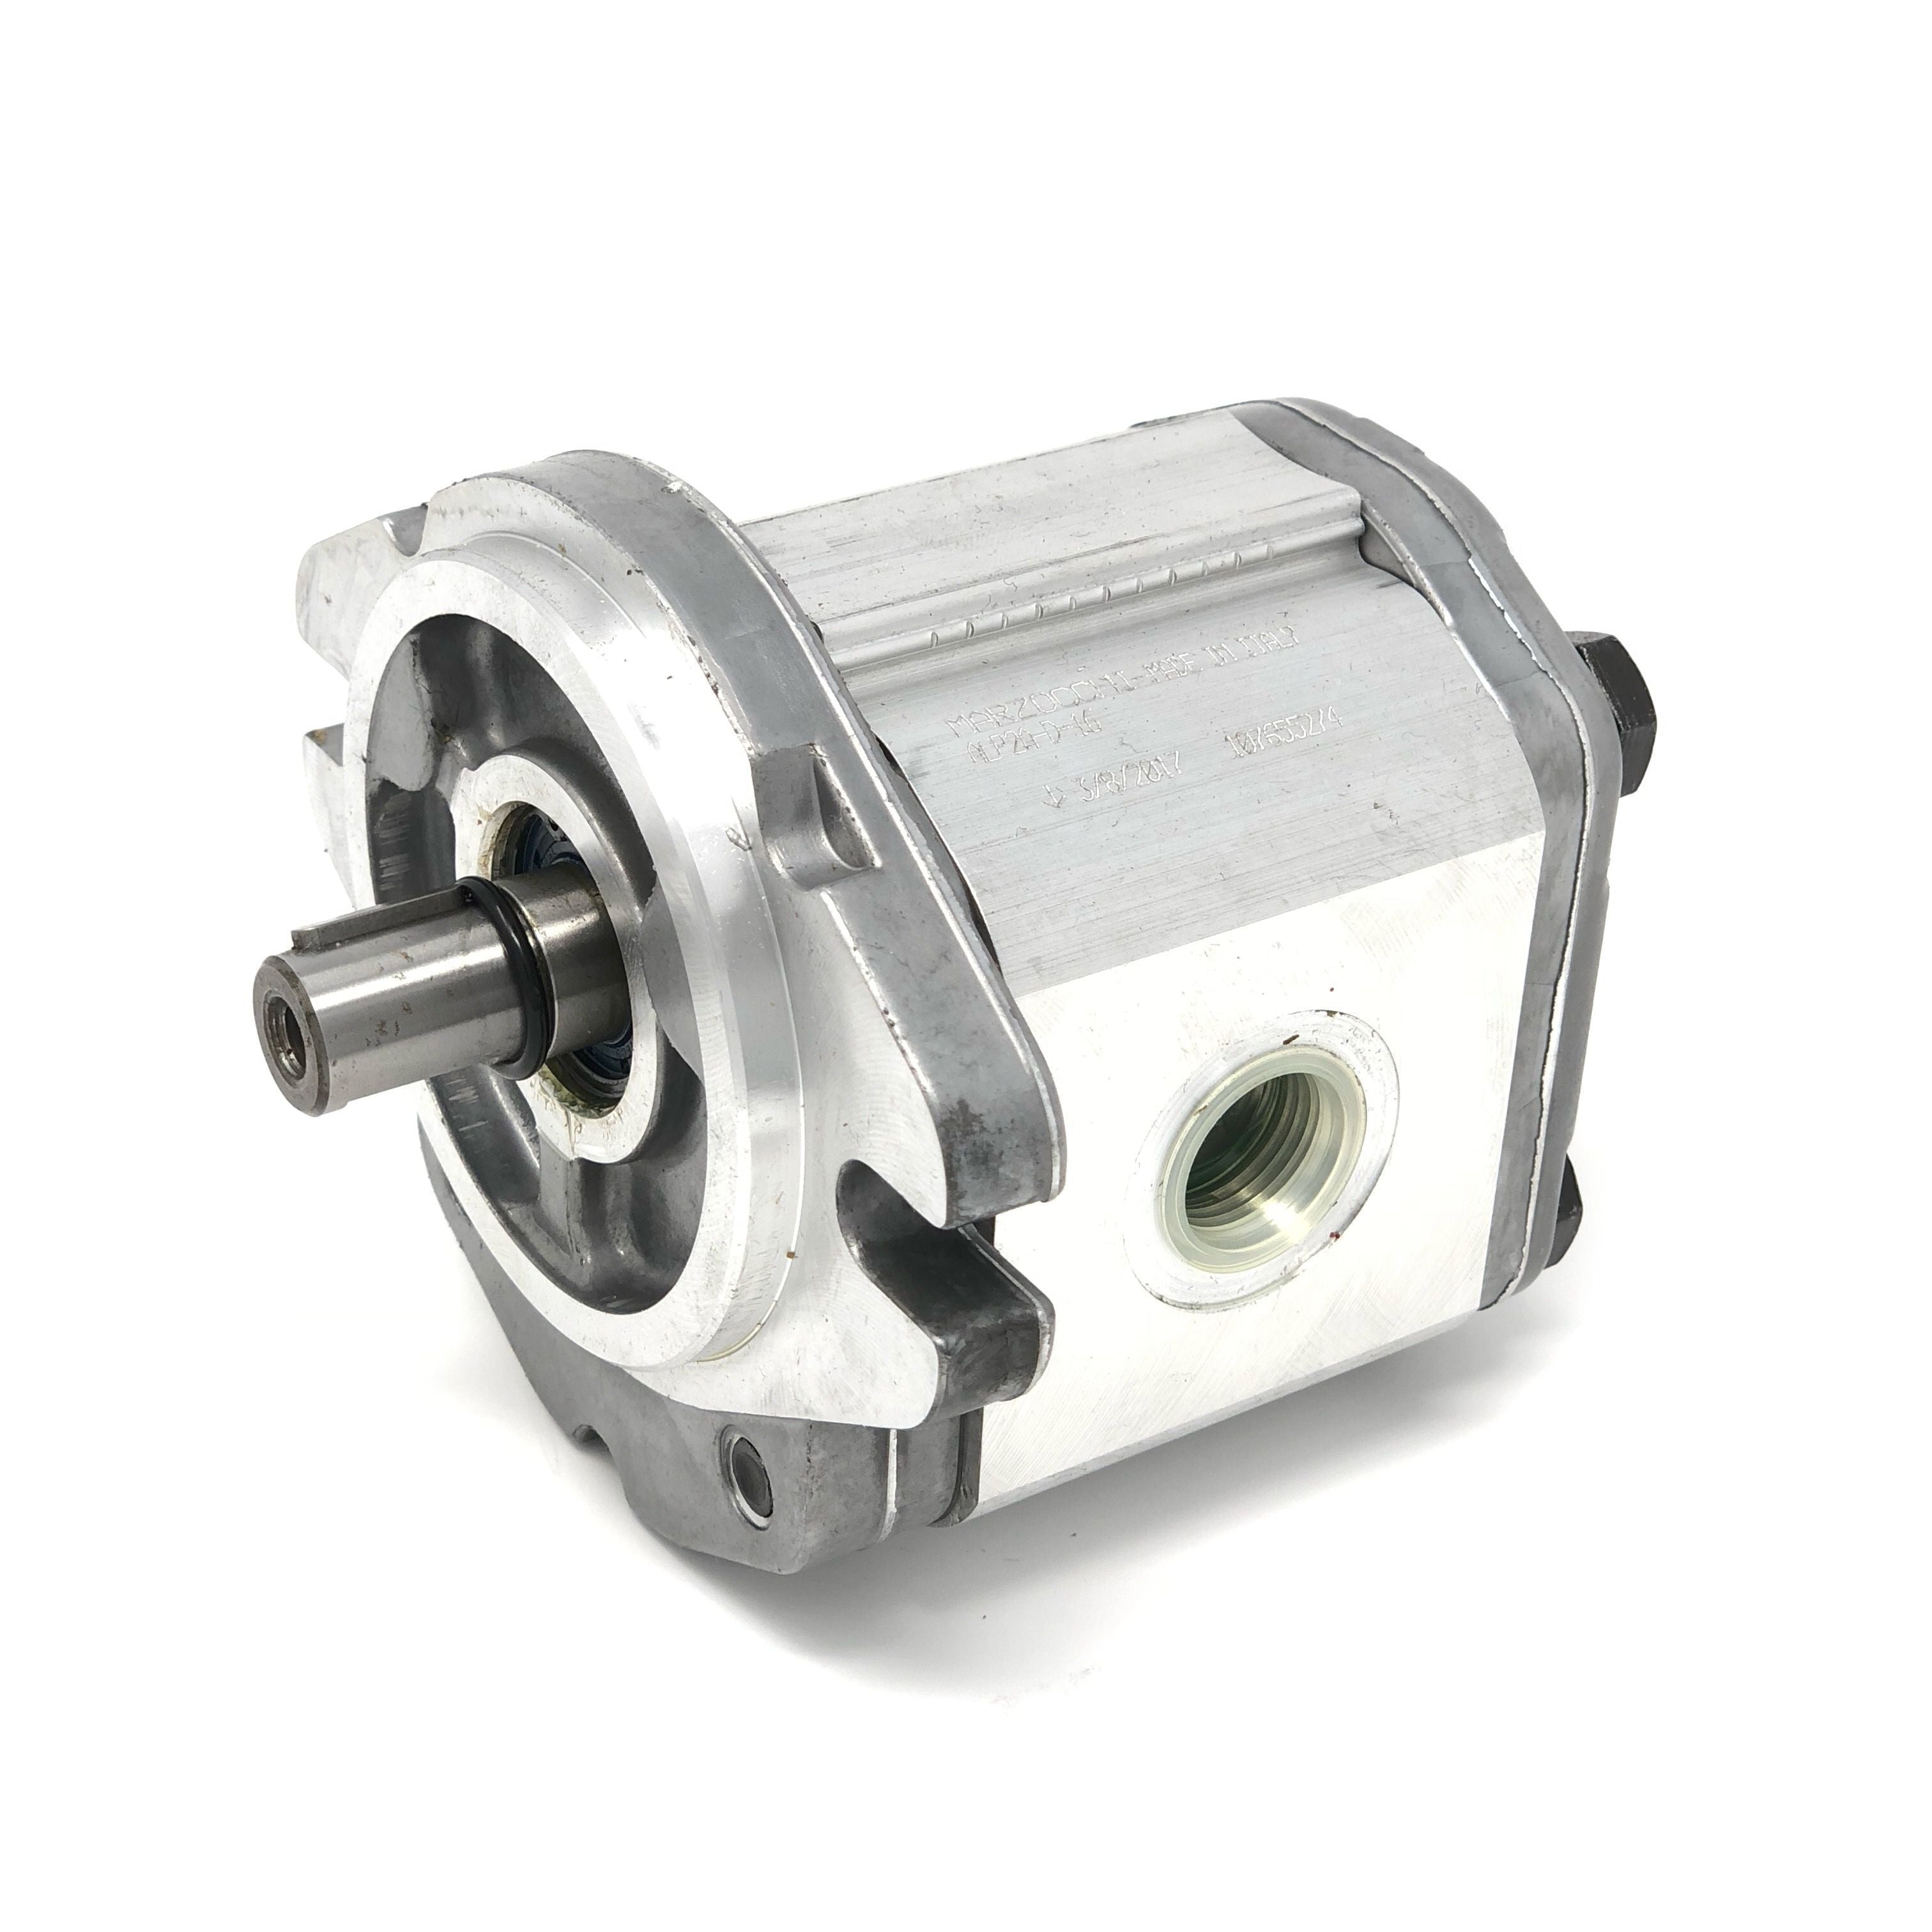 ALP2A-D-16 : Marzocchi Gear Pump, CW, 11.5cc (0.7015in3), 5.47 GPM, 3335psi, 4000 RPM, #12 SAE (3/4") In, #10 SAE (5/8") Out, Keyed Shaft 5/8" Bore x 5/32" Key, SAE A 2-Bolt Mount